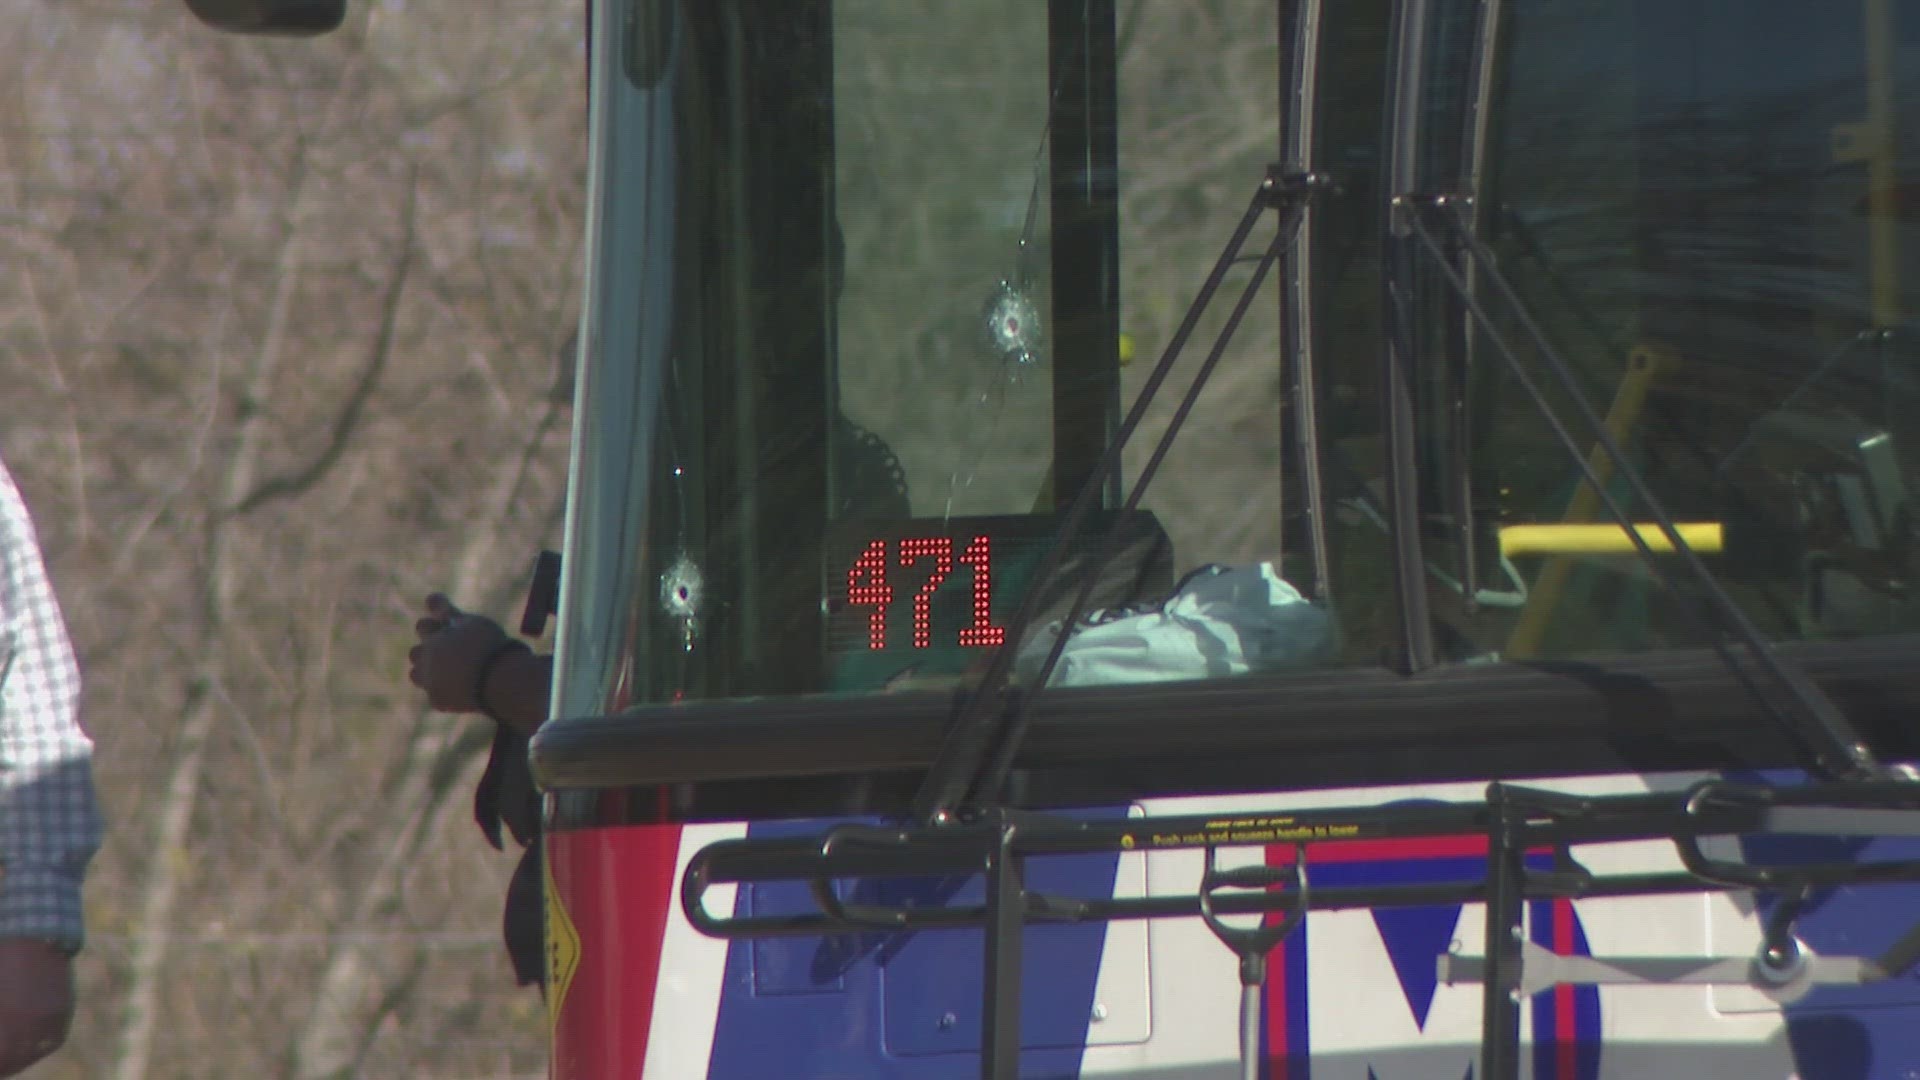 Witnesses said the shooter fired into the bus, then boarded it and fired more shots. Two men were fatally struck.